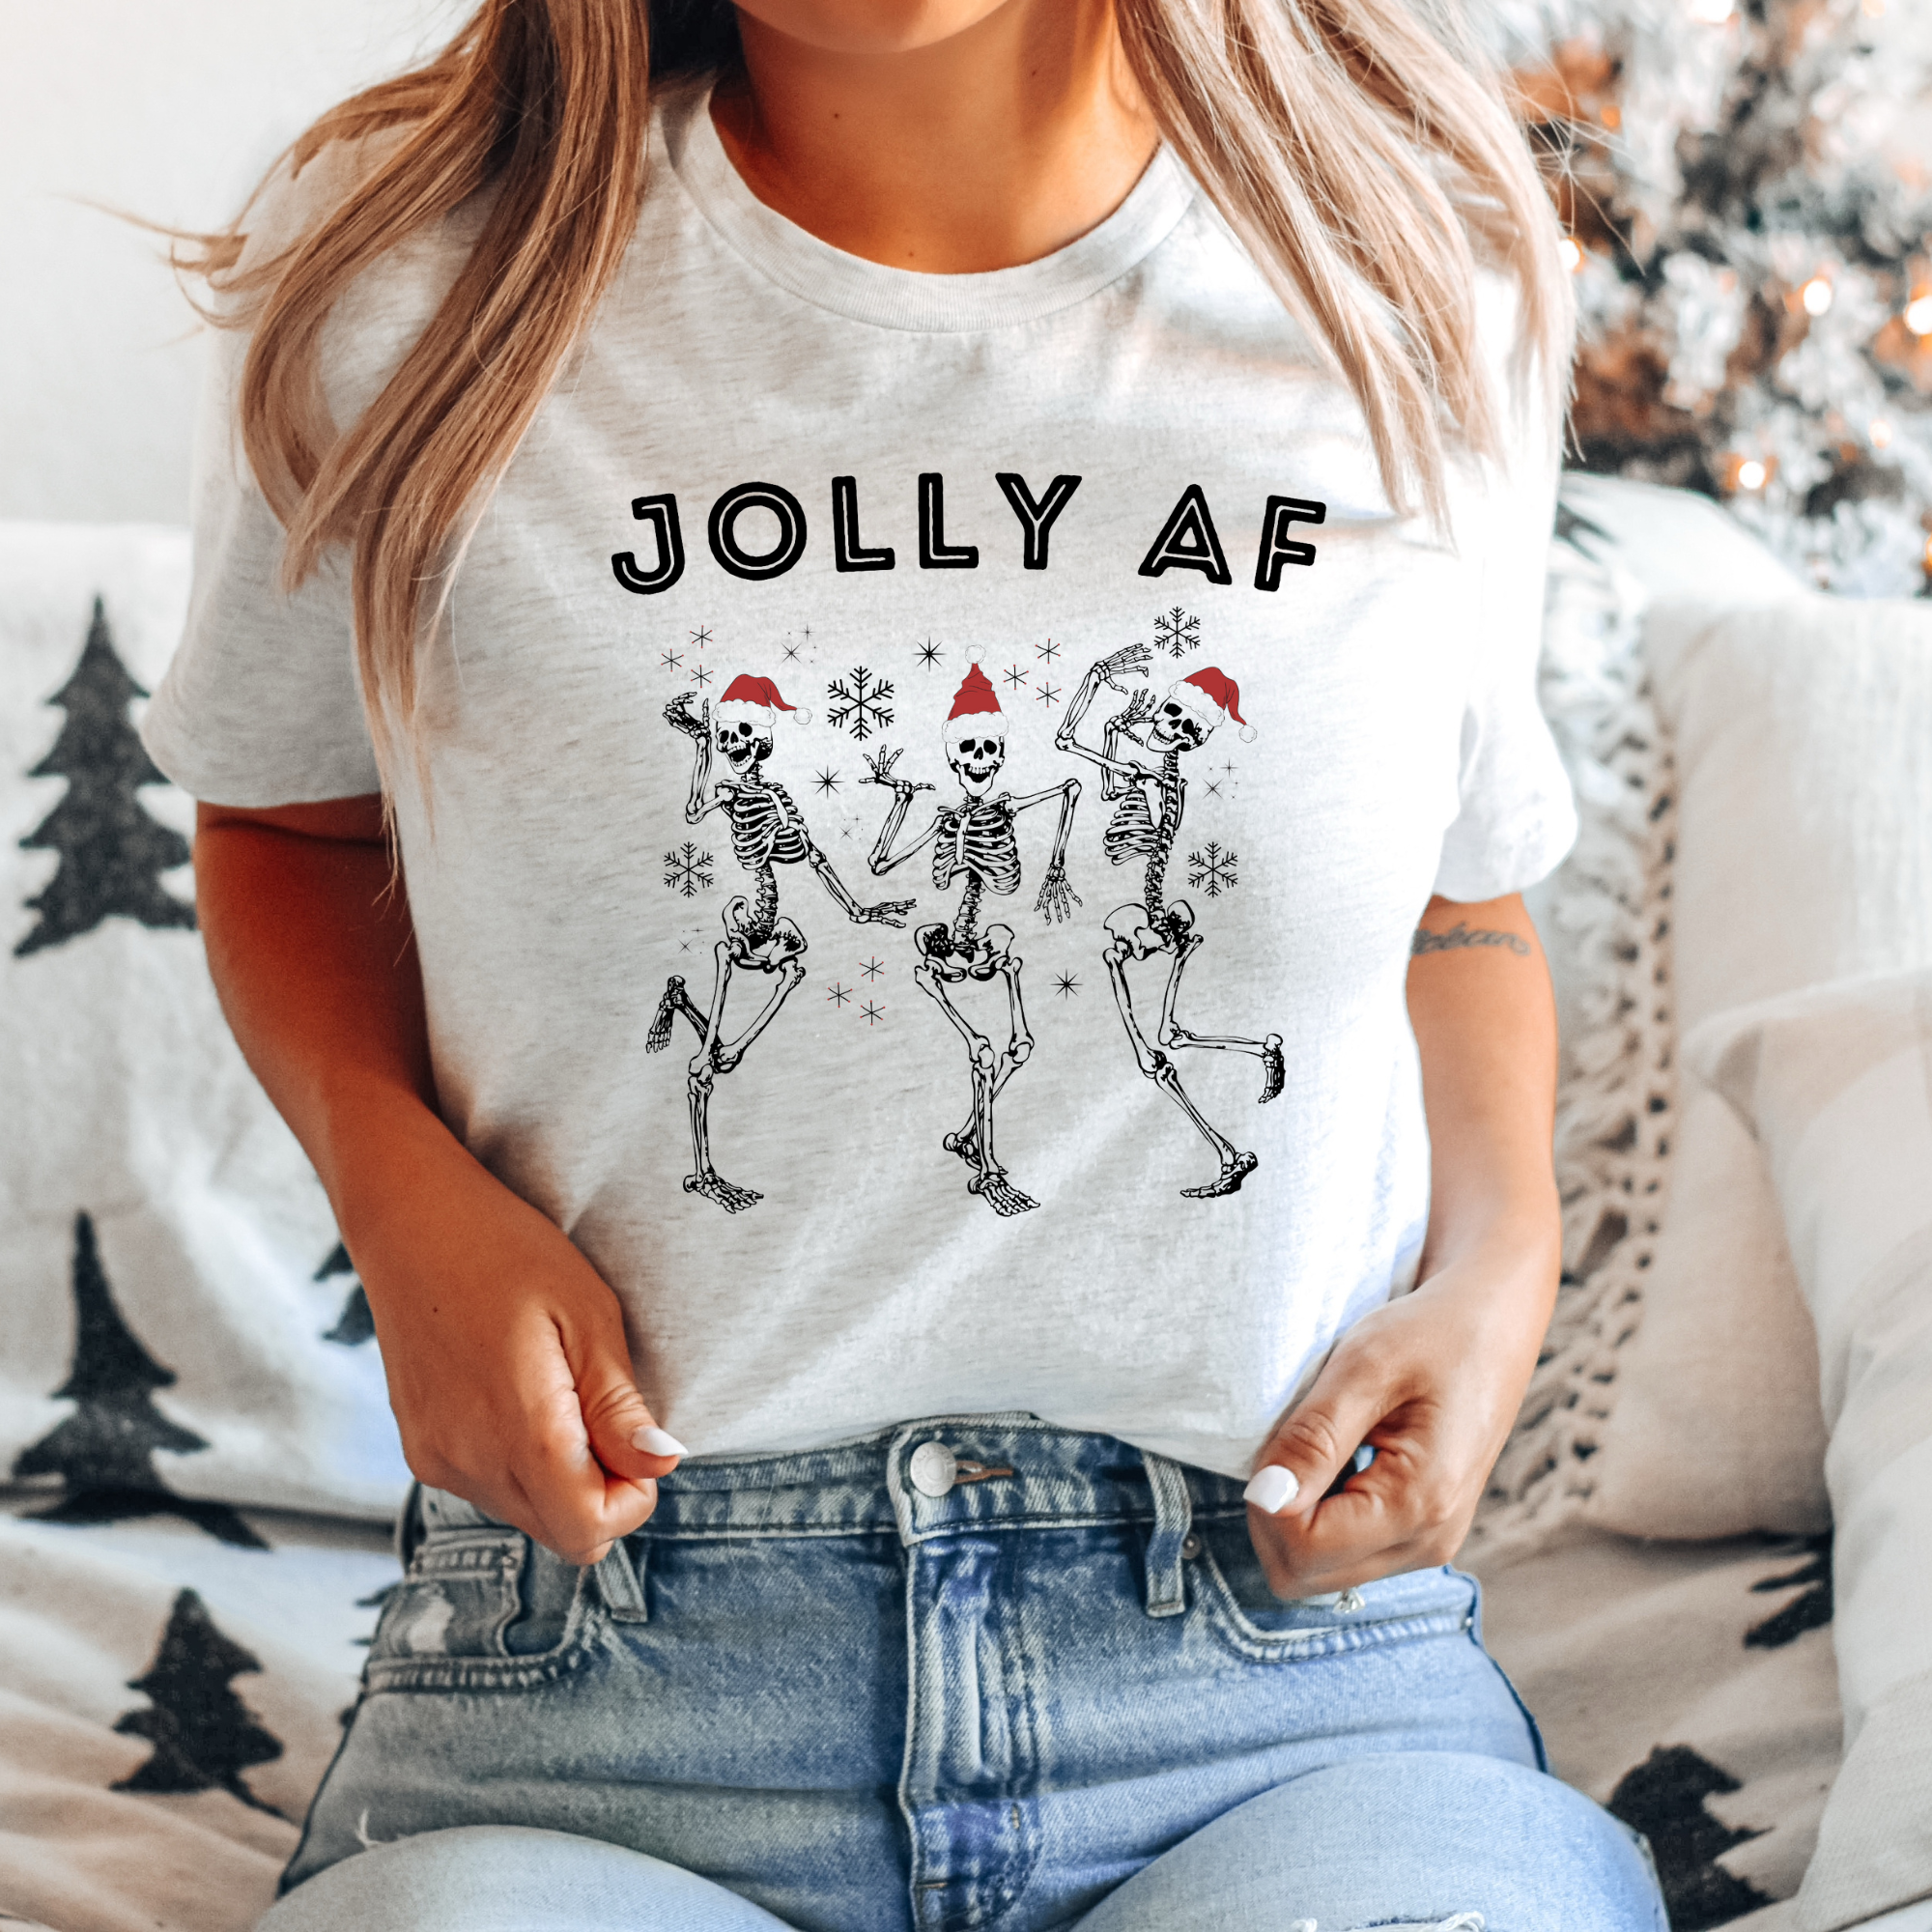 Jolly AF Christmas Tshirt for Women *UNISEX FIT*-208 Tees Wholesale, Idaho